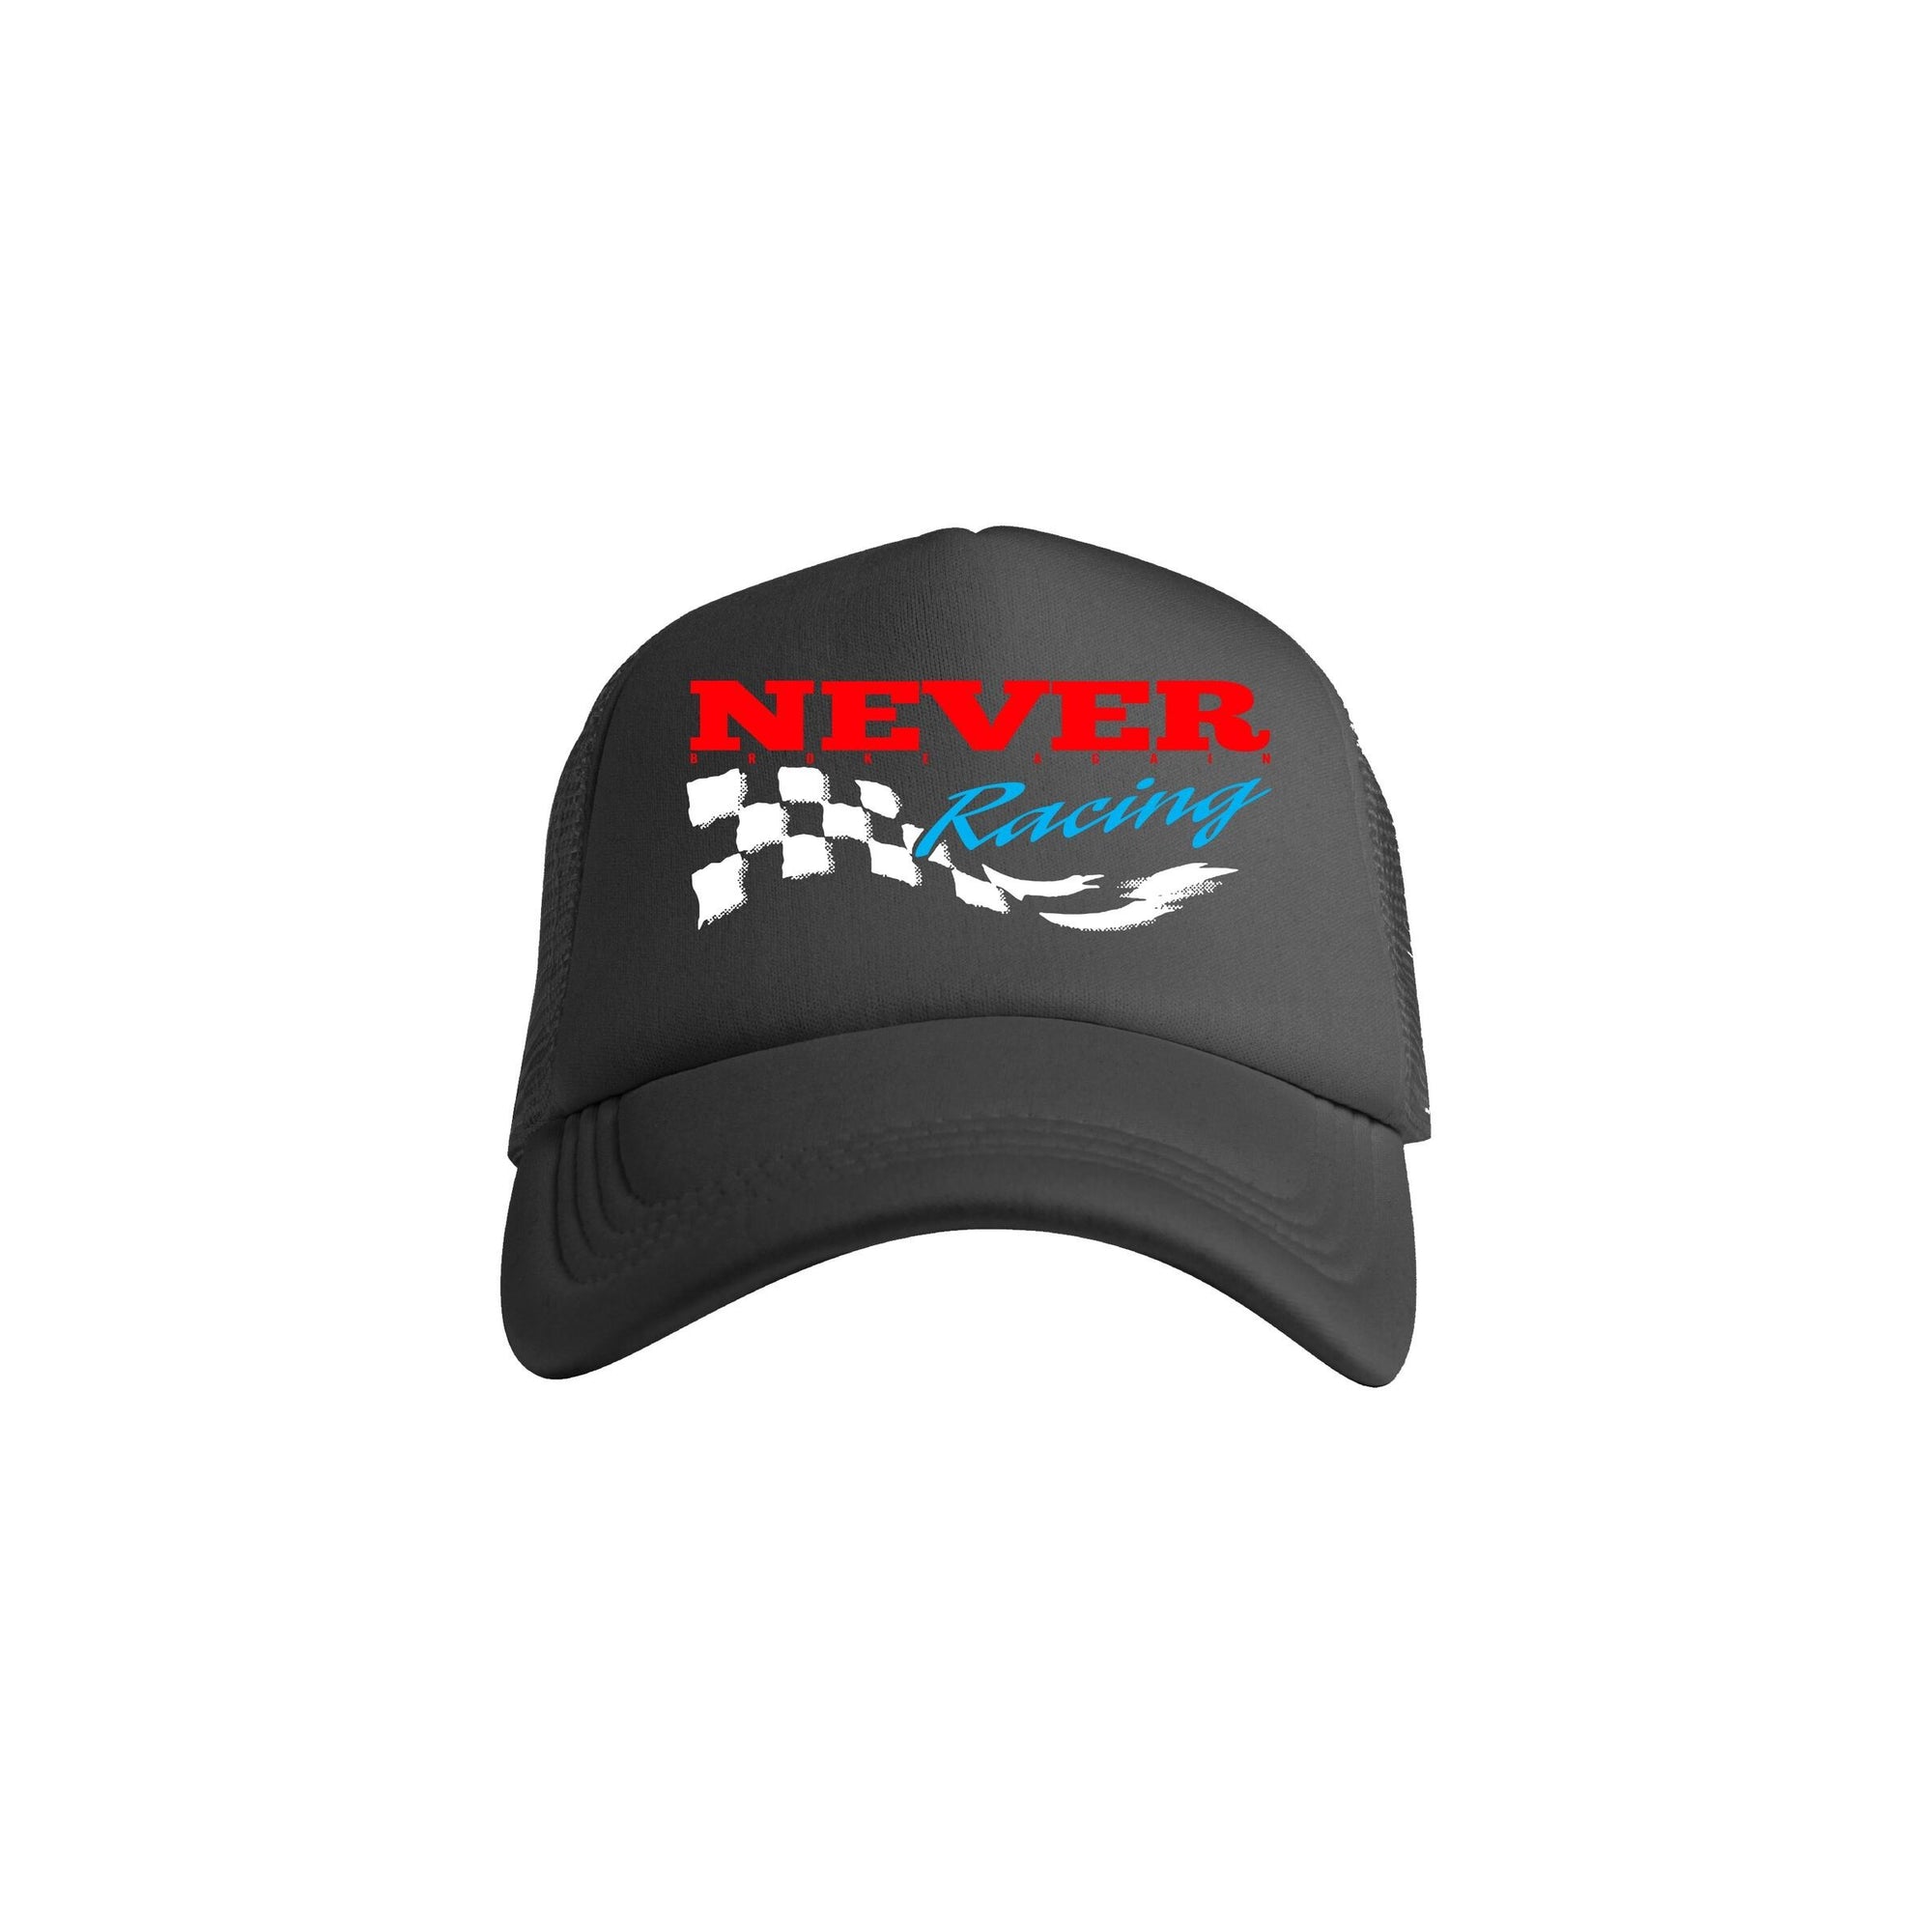 Finish Line Hat by Never Broke Again - FLY GUYZ